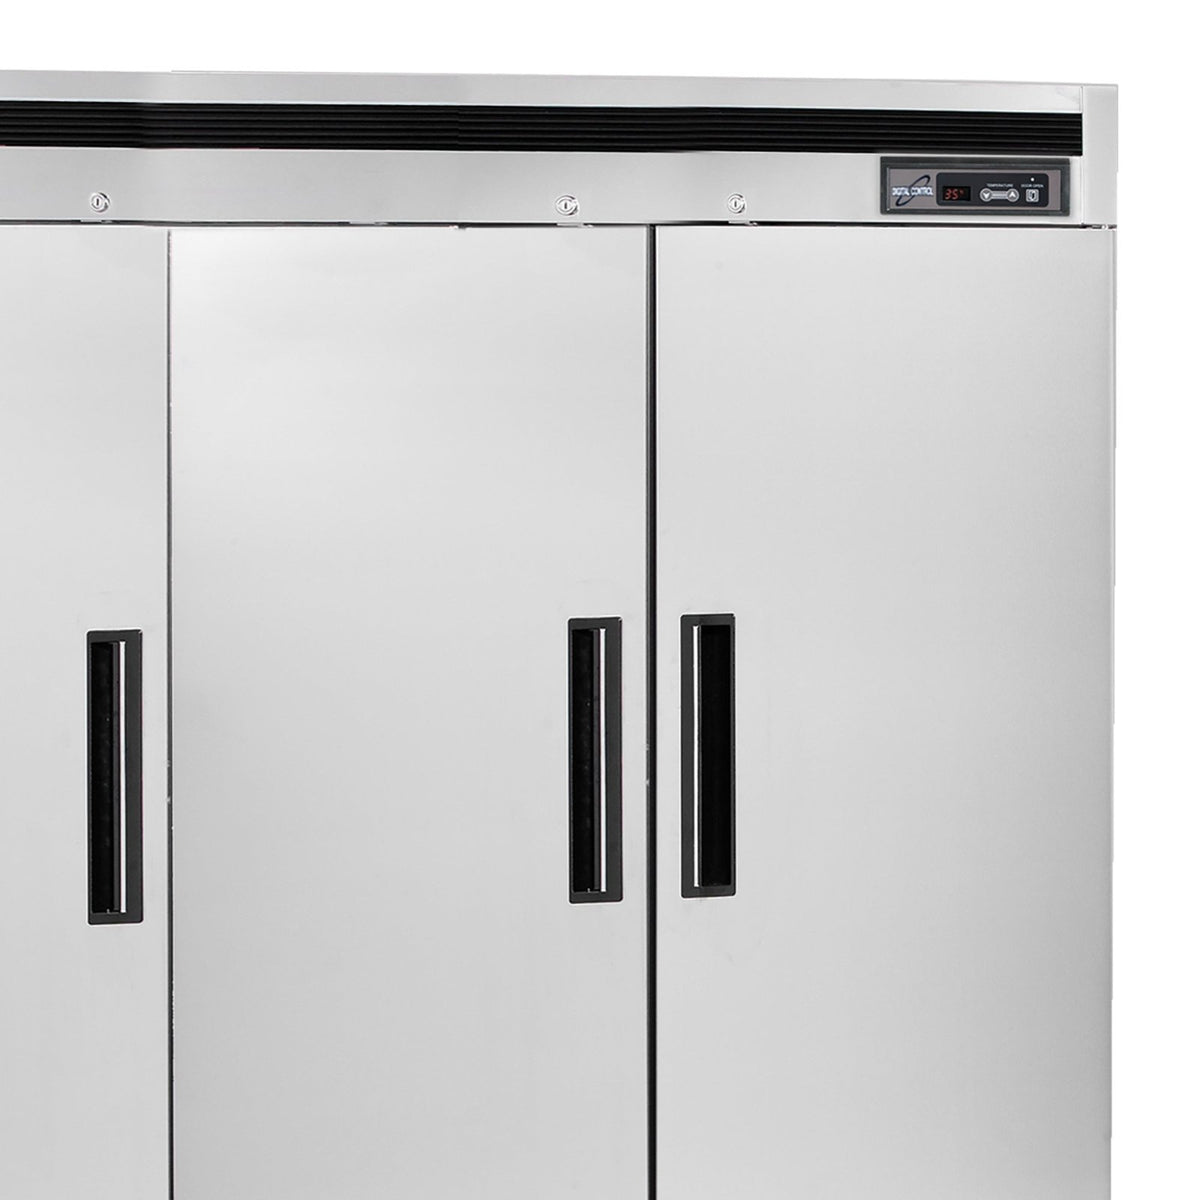 Maxx Cold MCF - 72FDHC Triple Door Reach - In Freezer, Bottom Mount, 81"W, 72 cu. ft. Storage Capacity, in Stainless Steel - TheChefStore.Com